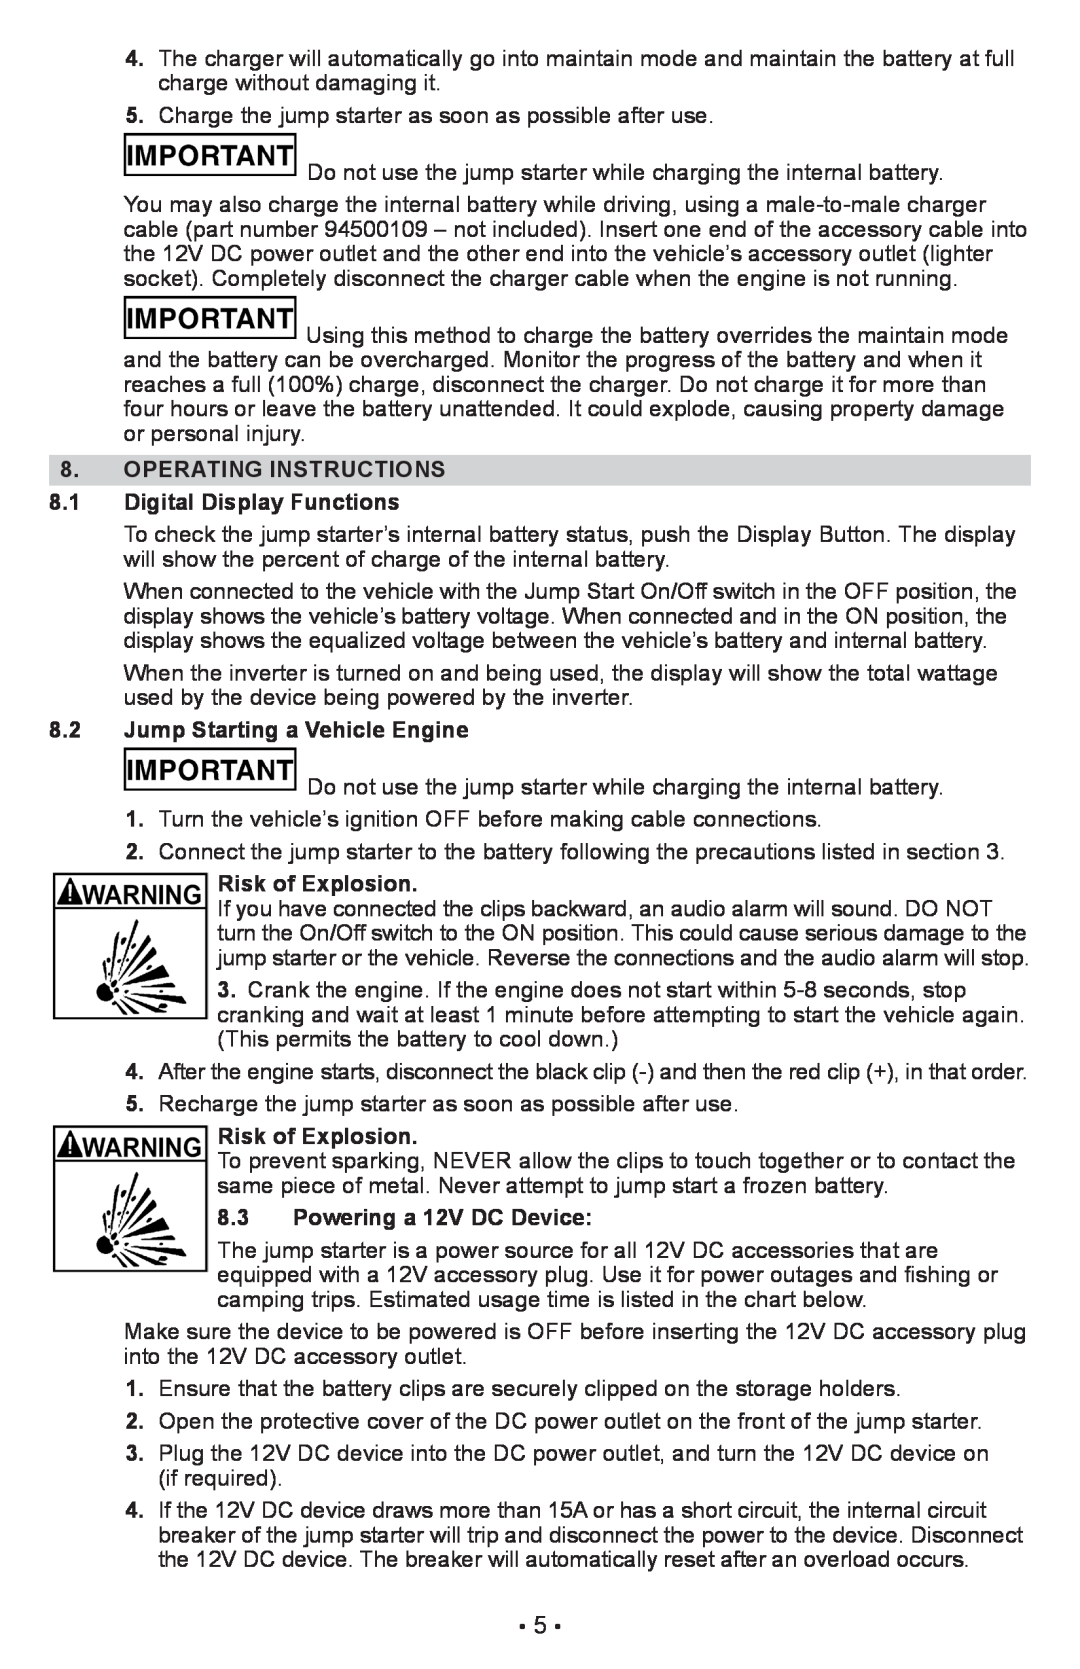 Sears 28.71988 OPERATING INSTRUCTIONS 8.1 Digital Display Functions, Jump Starting a Vehicle Engine, Risk of Explosion 